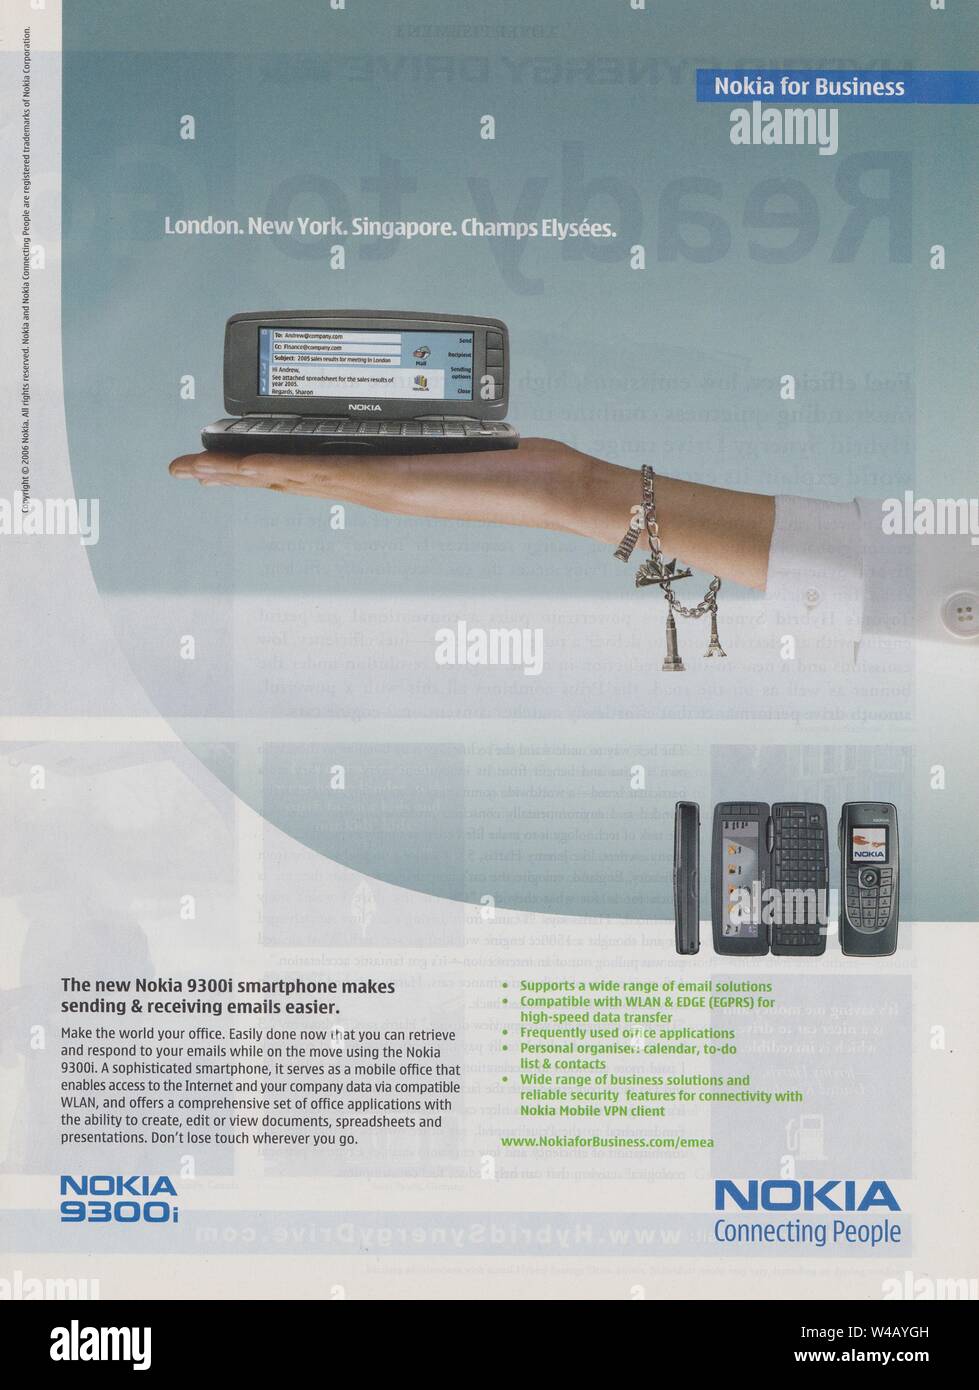 poster advertising Nokia 9300i phone, in magazine from 2006 year, NOKIA Connecting People slogan, advertisement, creative Nokia advert from 2000s Stock Photo